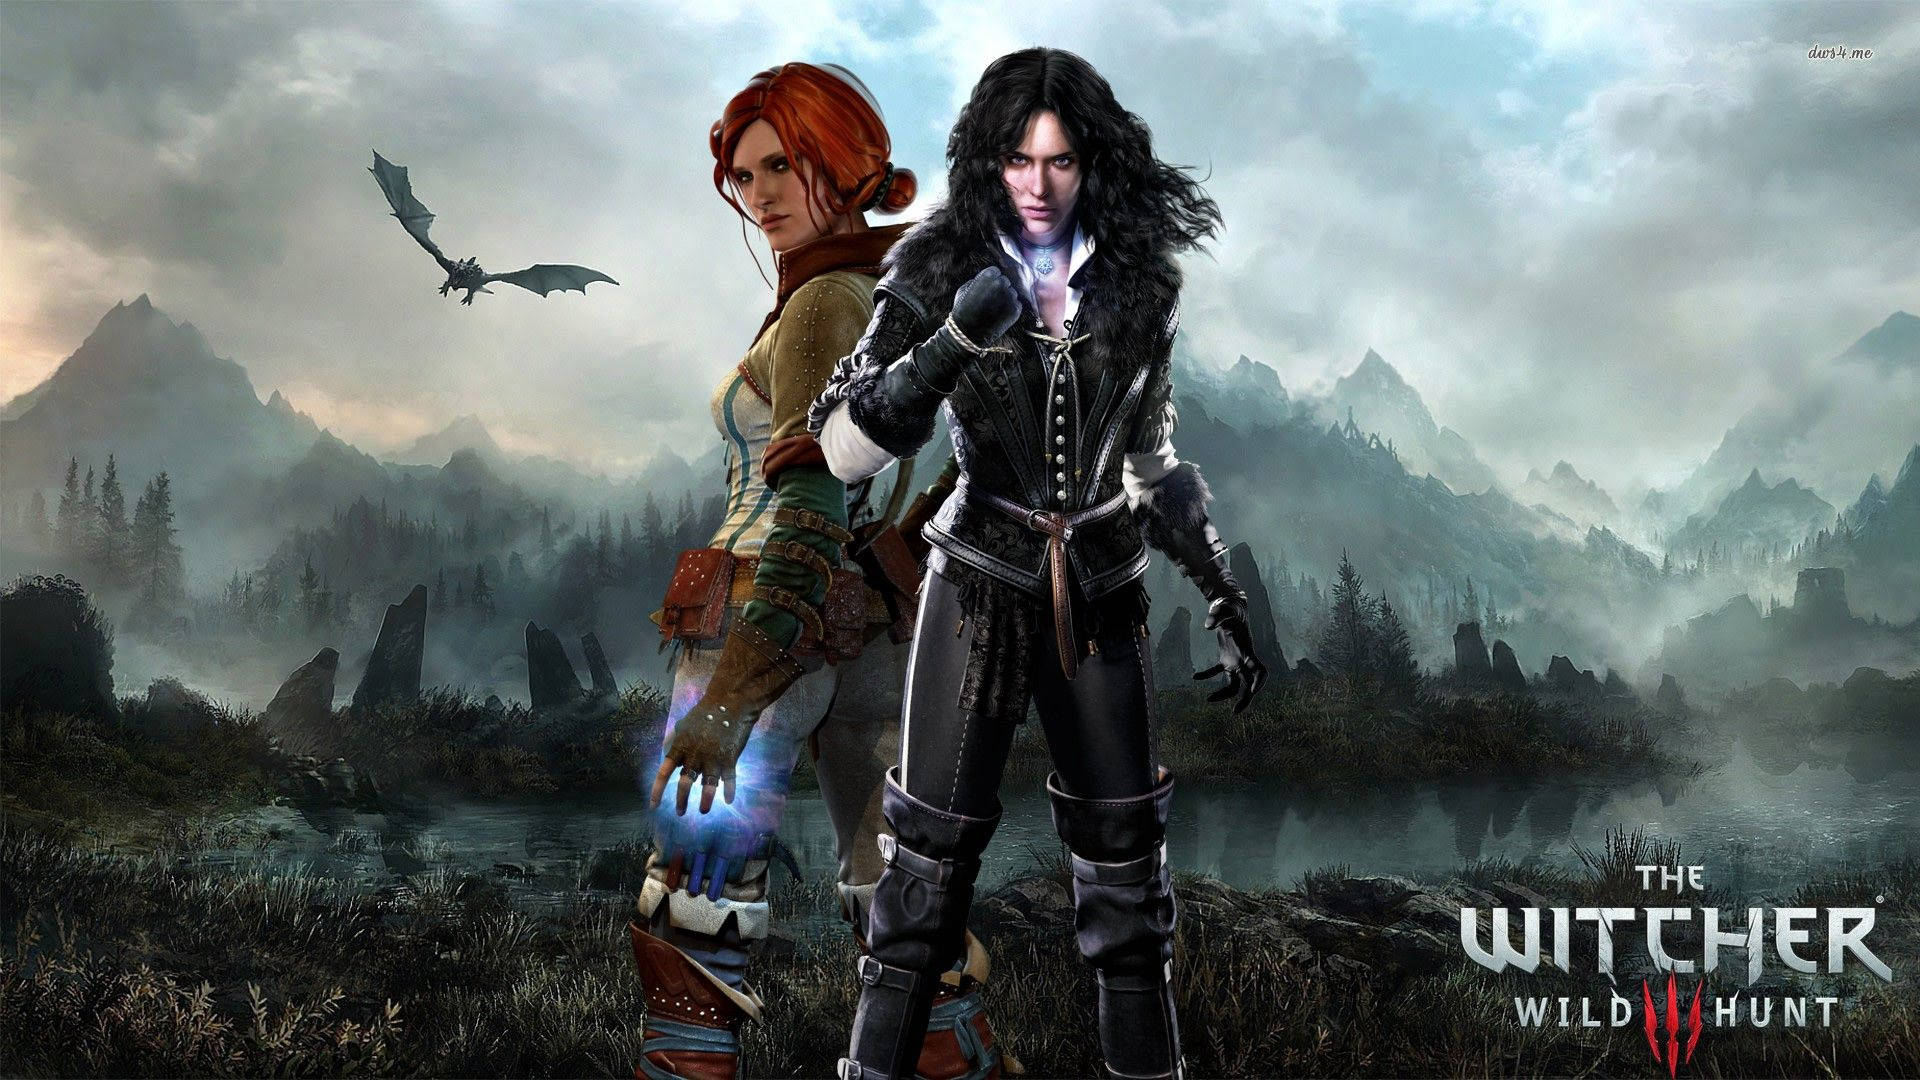 The Witcher Triss And Yennefer Poster Background